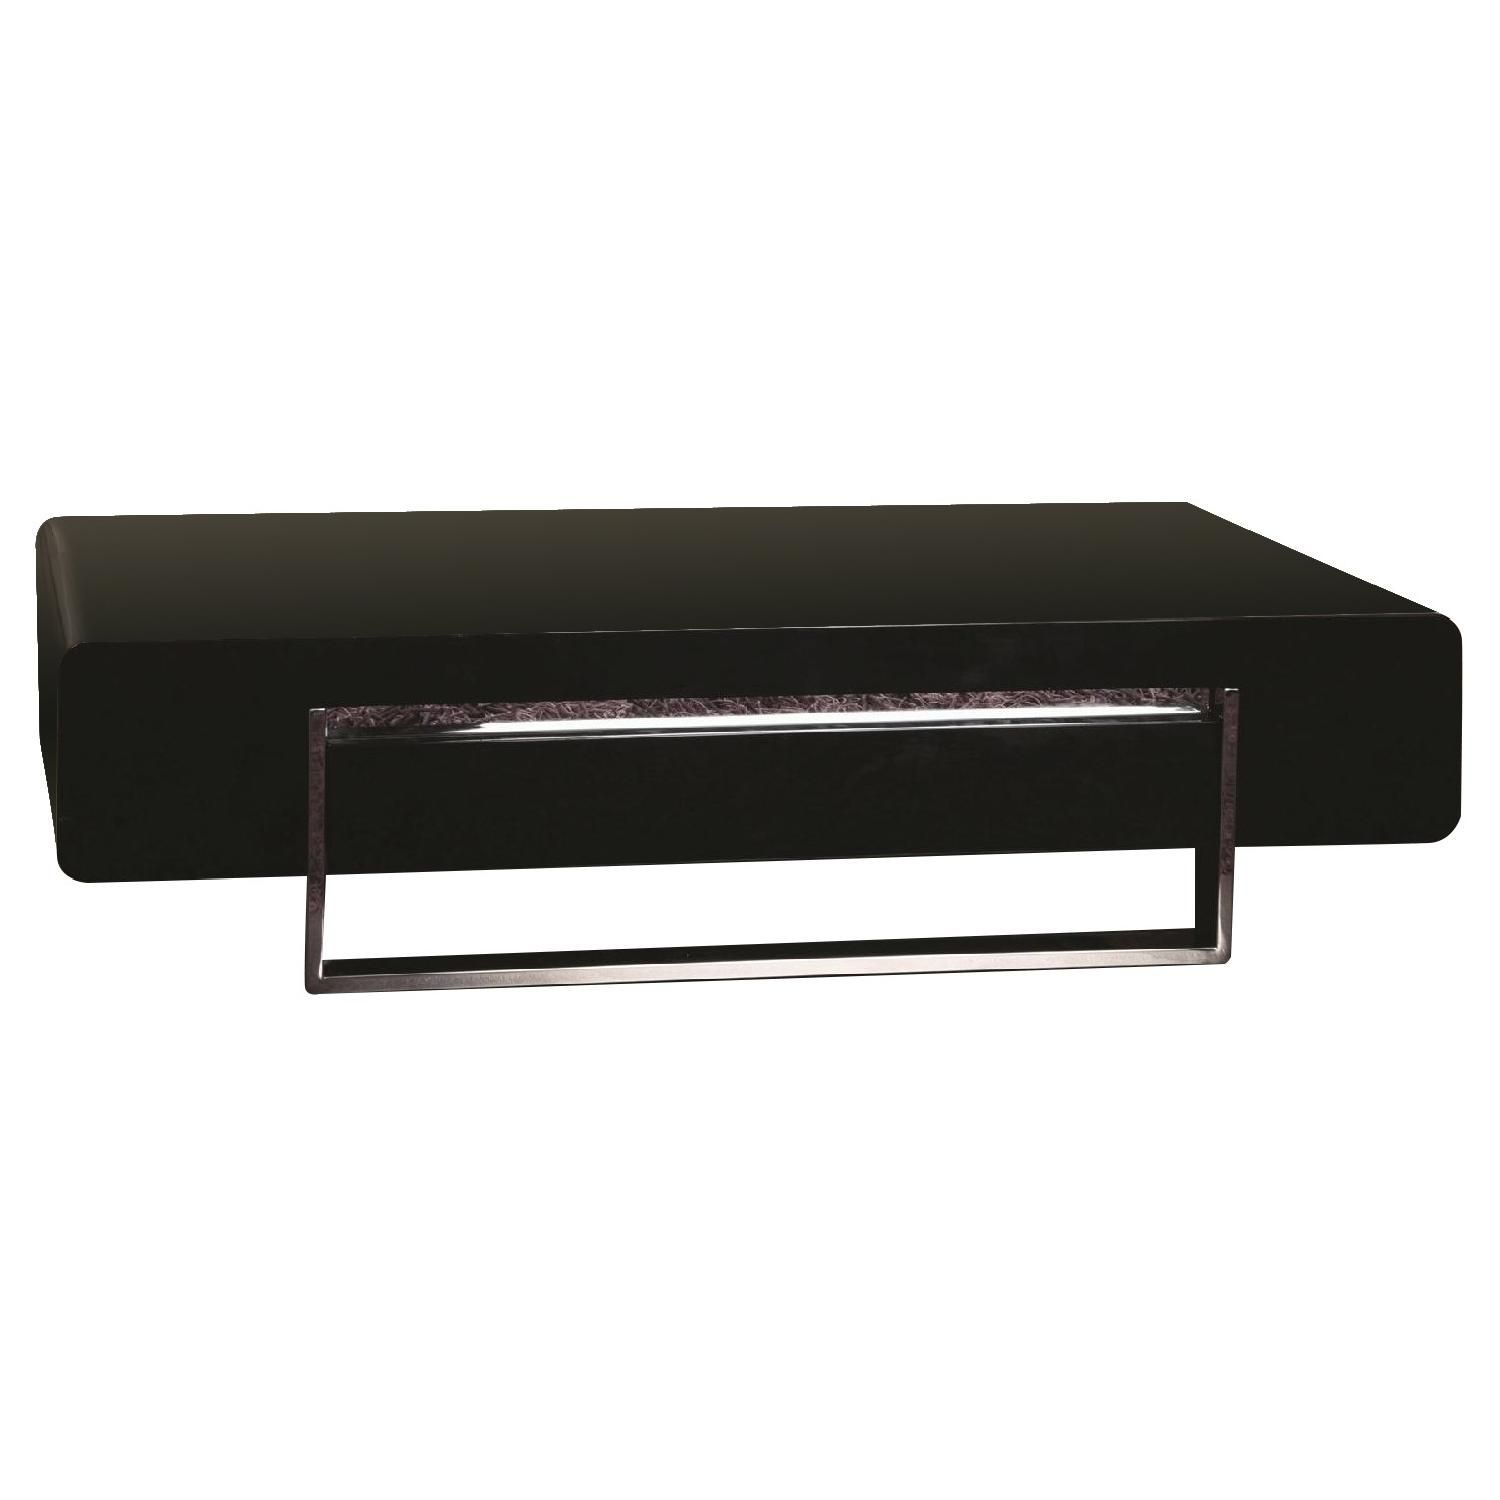 Modern Coffee Table In High Gloss Black Finish W/ Storage Dr – Aptdeco In High Gloss Black Coffee Tables (Gallery 10 of 20)